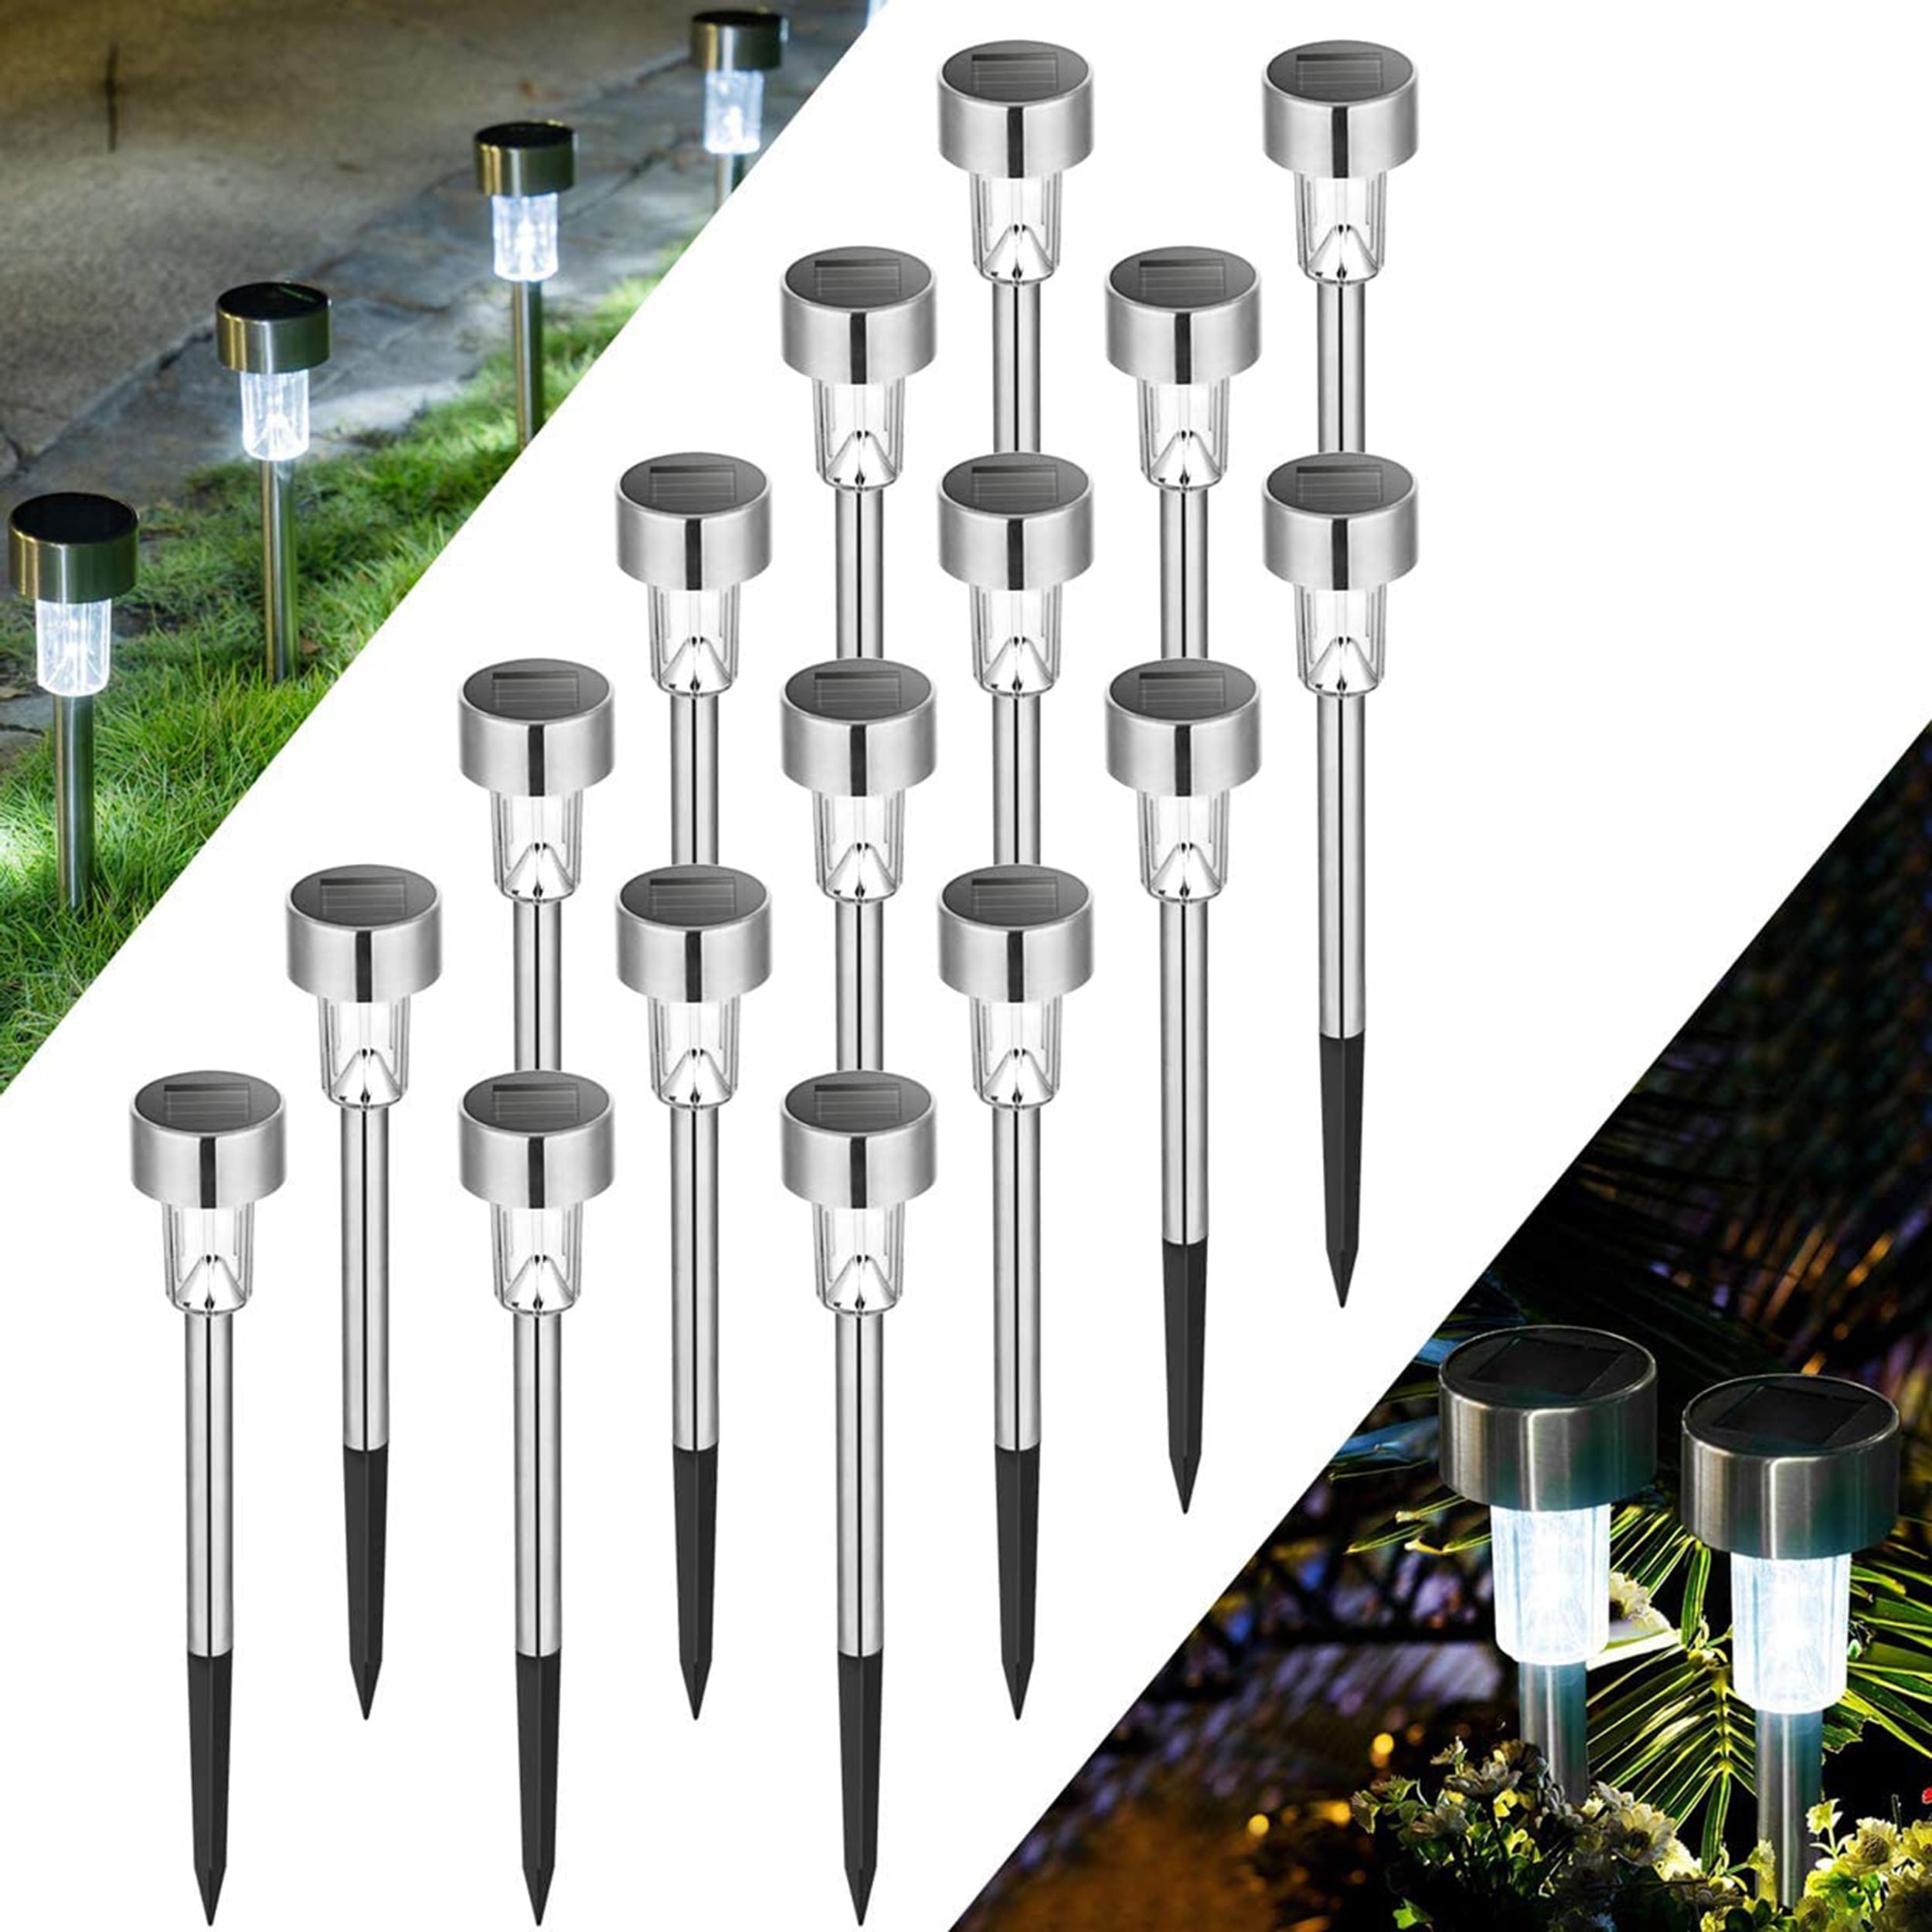 10x White Recharge Solor LED Garden Post Pathway Lights Lawn Patio Lighting Xmas 